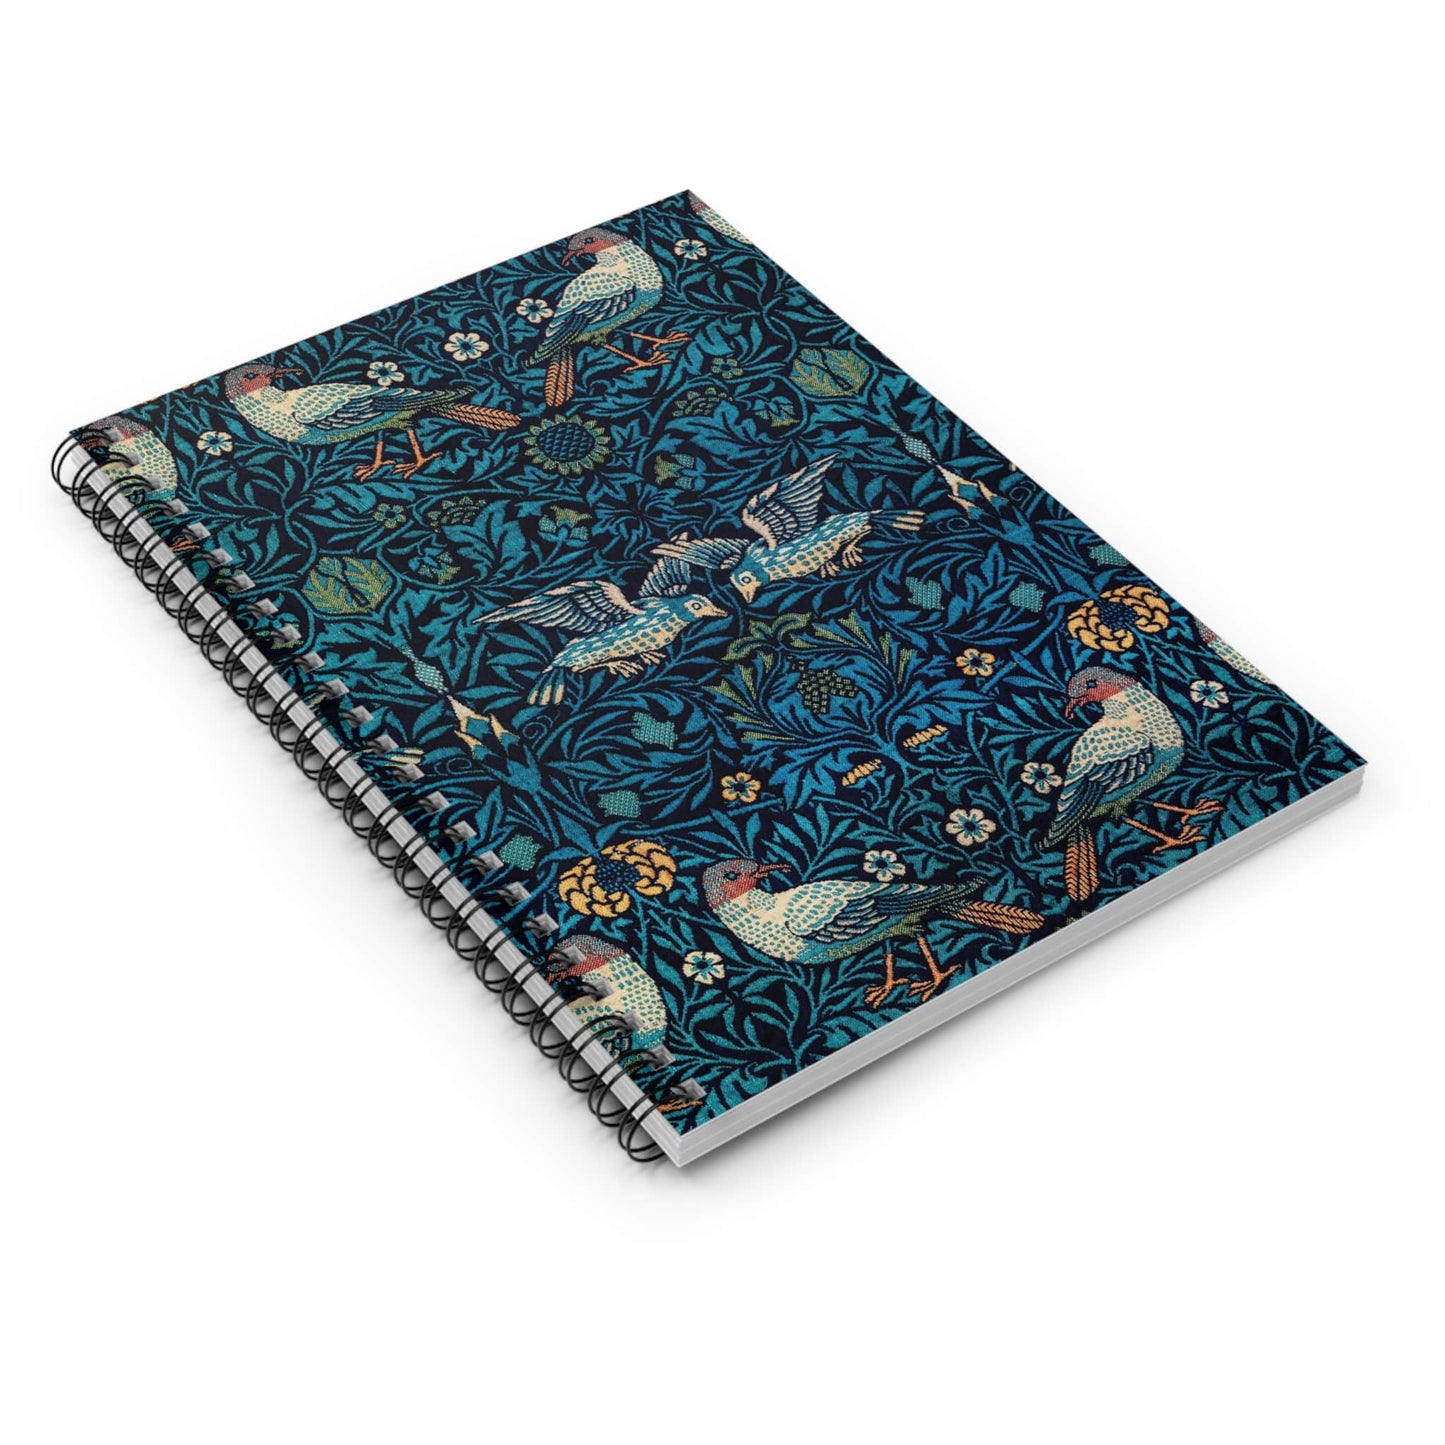 Blue Nature Pattern Spiral Notebook Laying Flat on White Surface